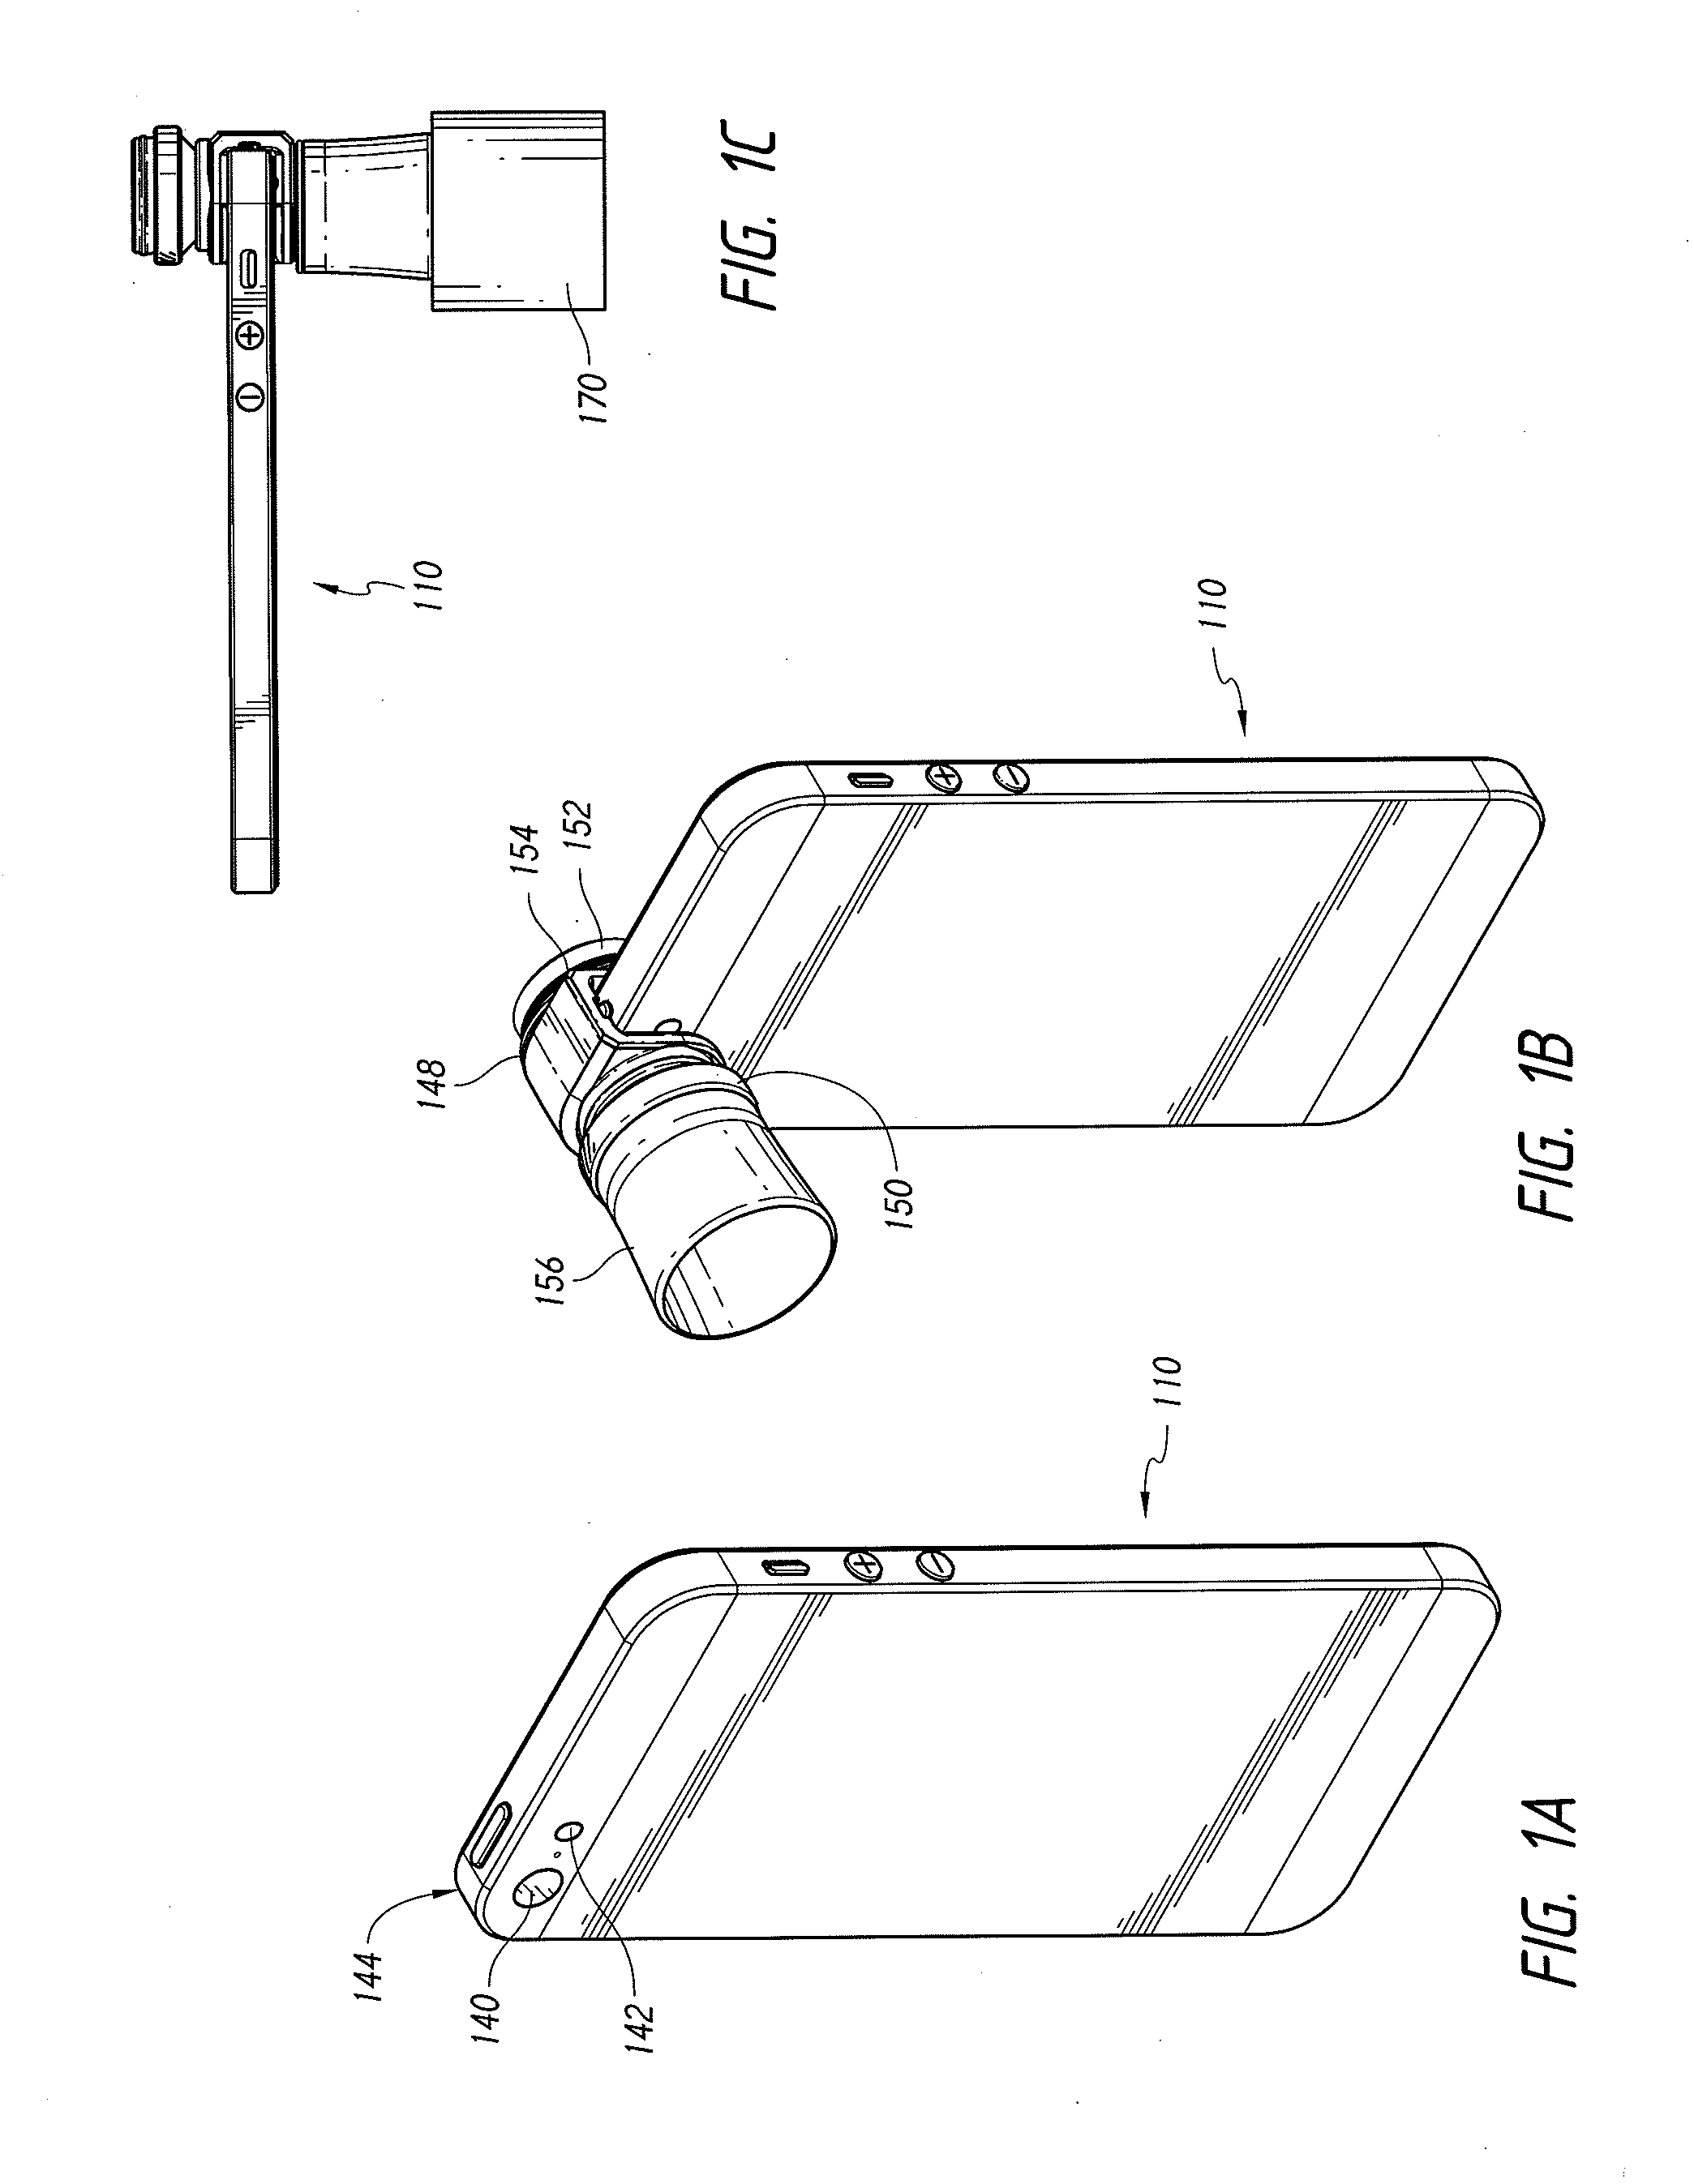 Devices and methods for close-up imaging with a mobile electronic device